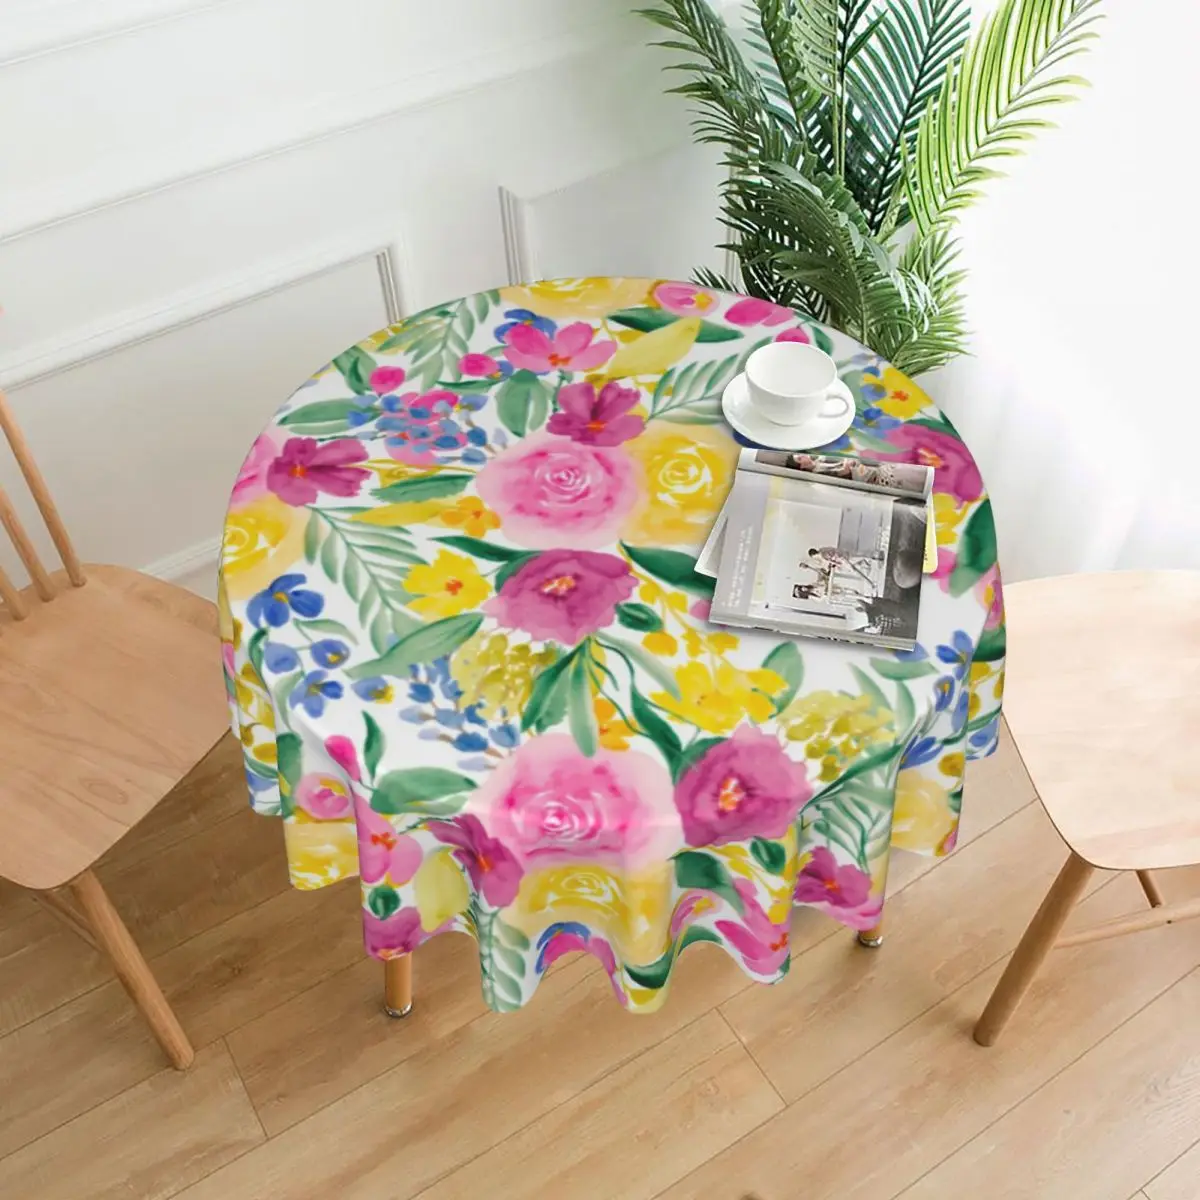 

Colroful Bright Flowers Tablecloth Floral Print Summer Polyester Table Cover Retro Cheap Decoration Printed Table Cloth